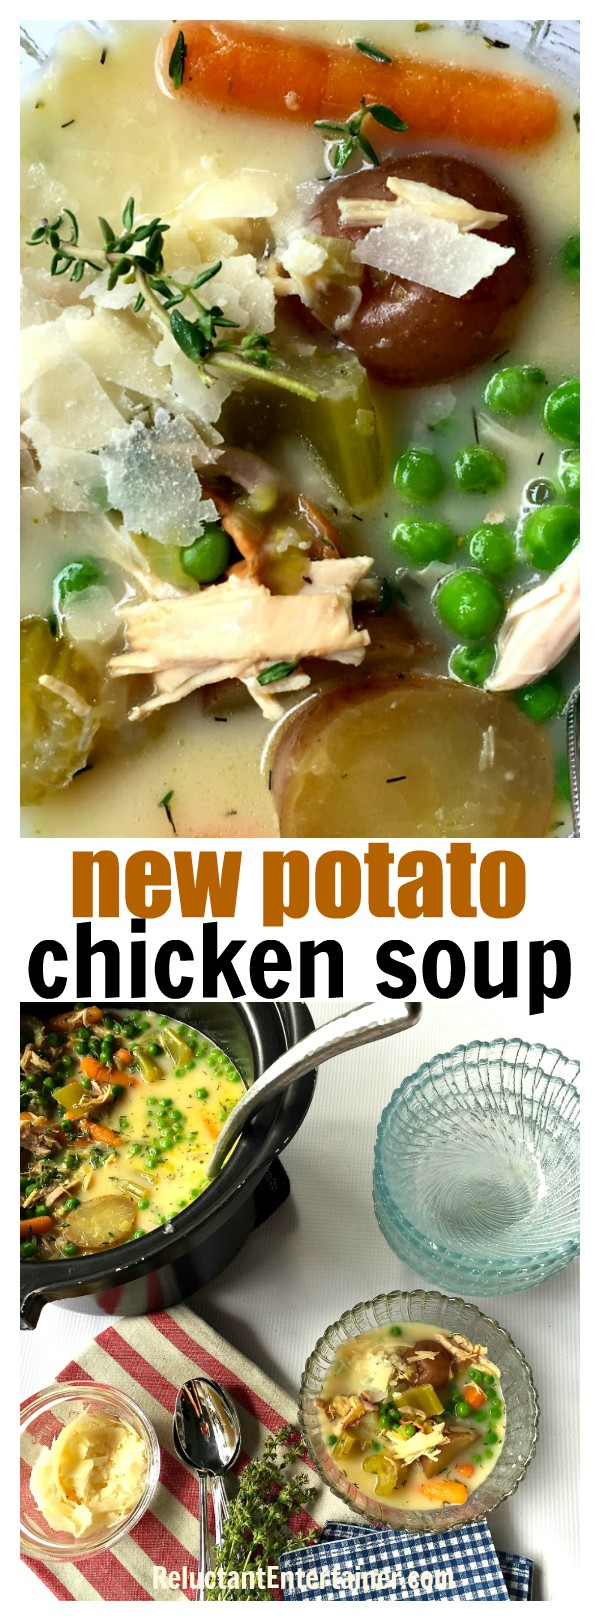 New Potato Chicken Soup--easy crock pot version of new potatoes and peas, made with Rotisserie chicken, herbs, and fresh veggies!